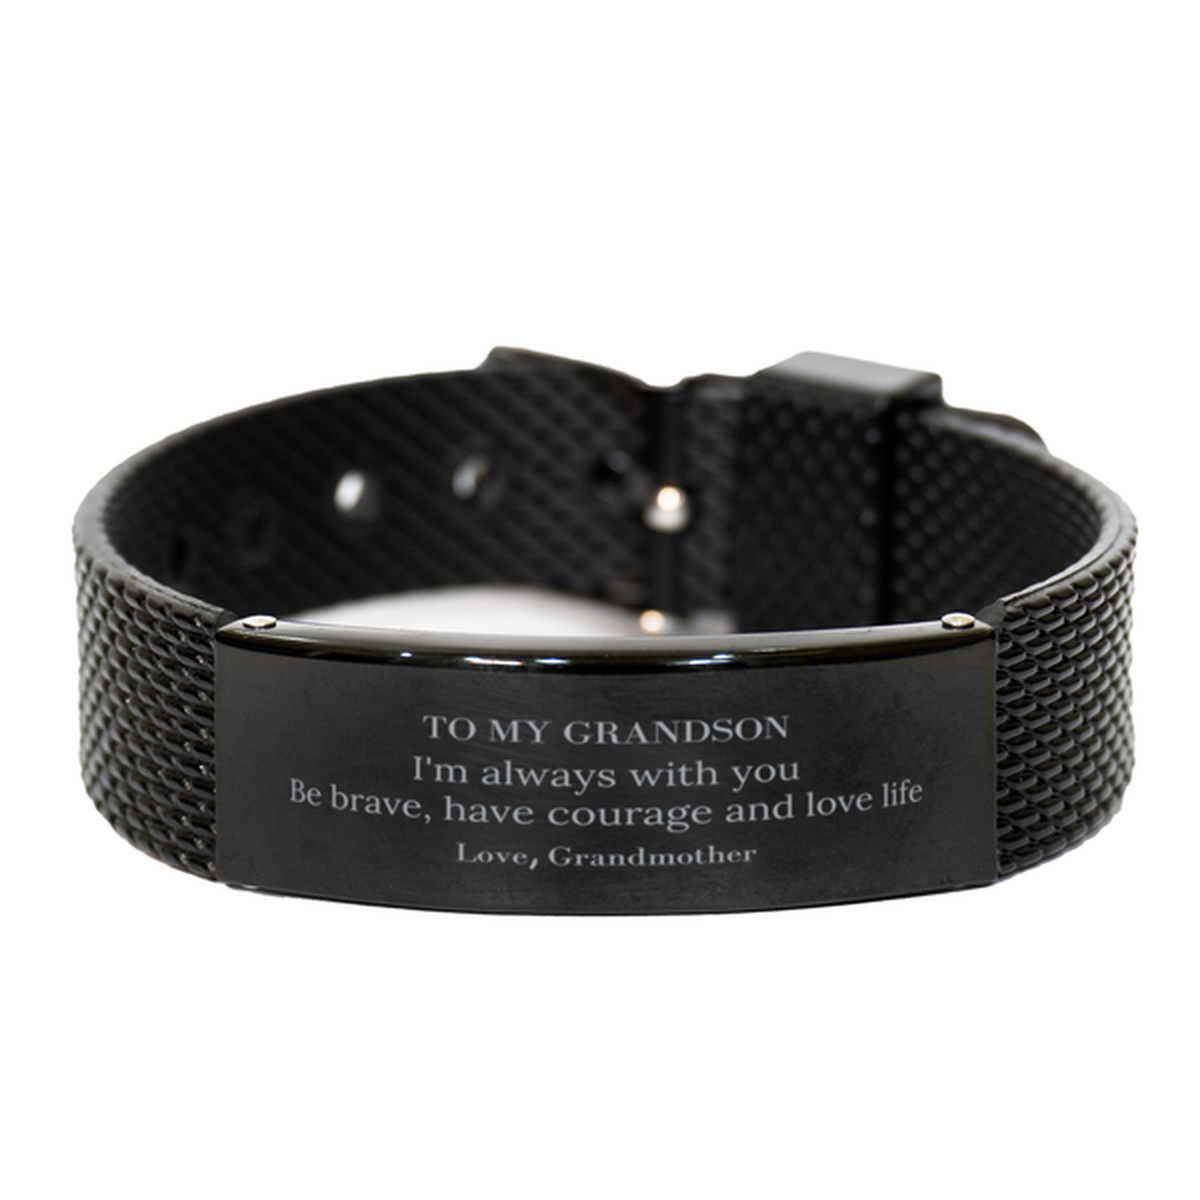 To My Grandson Gifts from Grandmother, Unique Black Shark Mesh Bracelet Inspirational Christmas Birthday Graduation Gifts for Grandson I'm always with you. Be brave, have courage and love life. Love, Grandmother